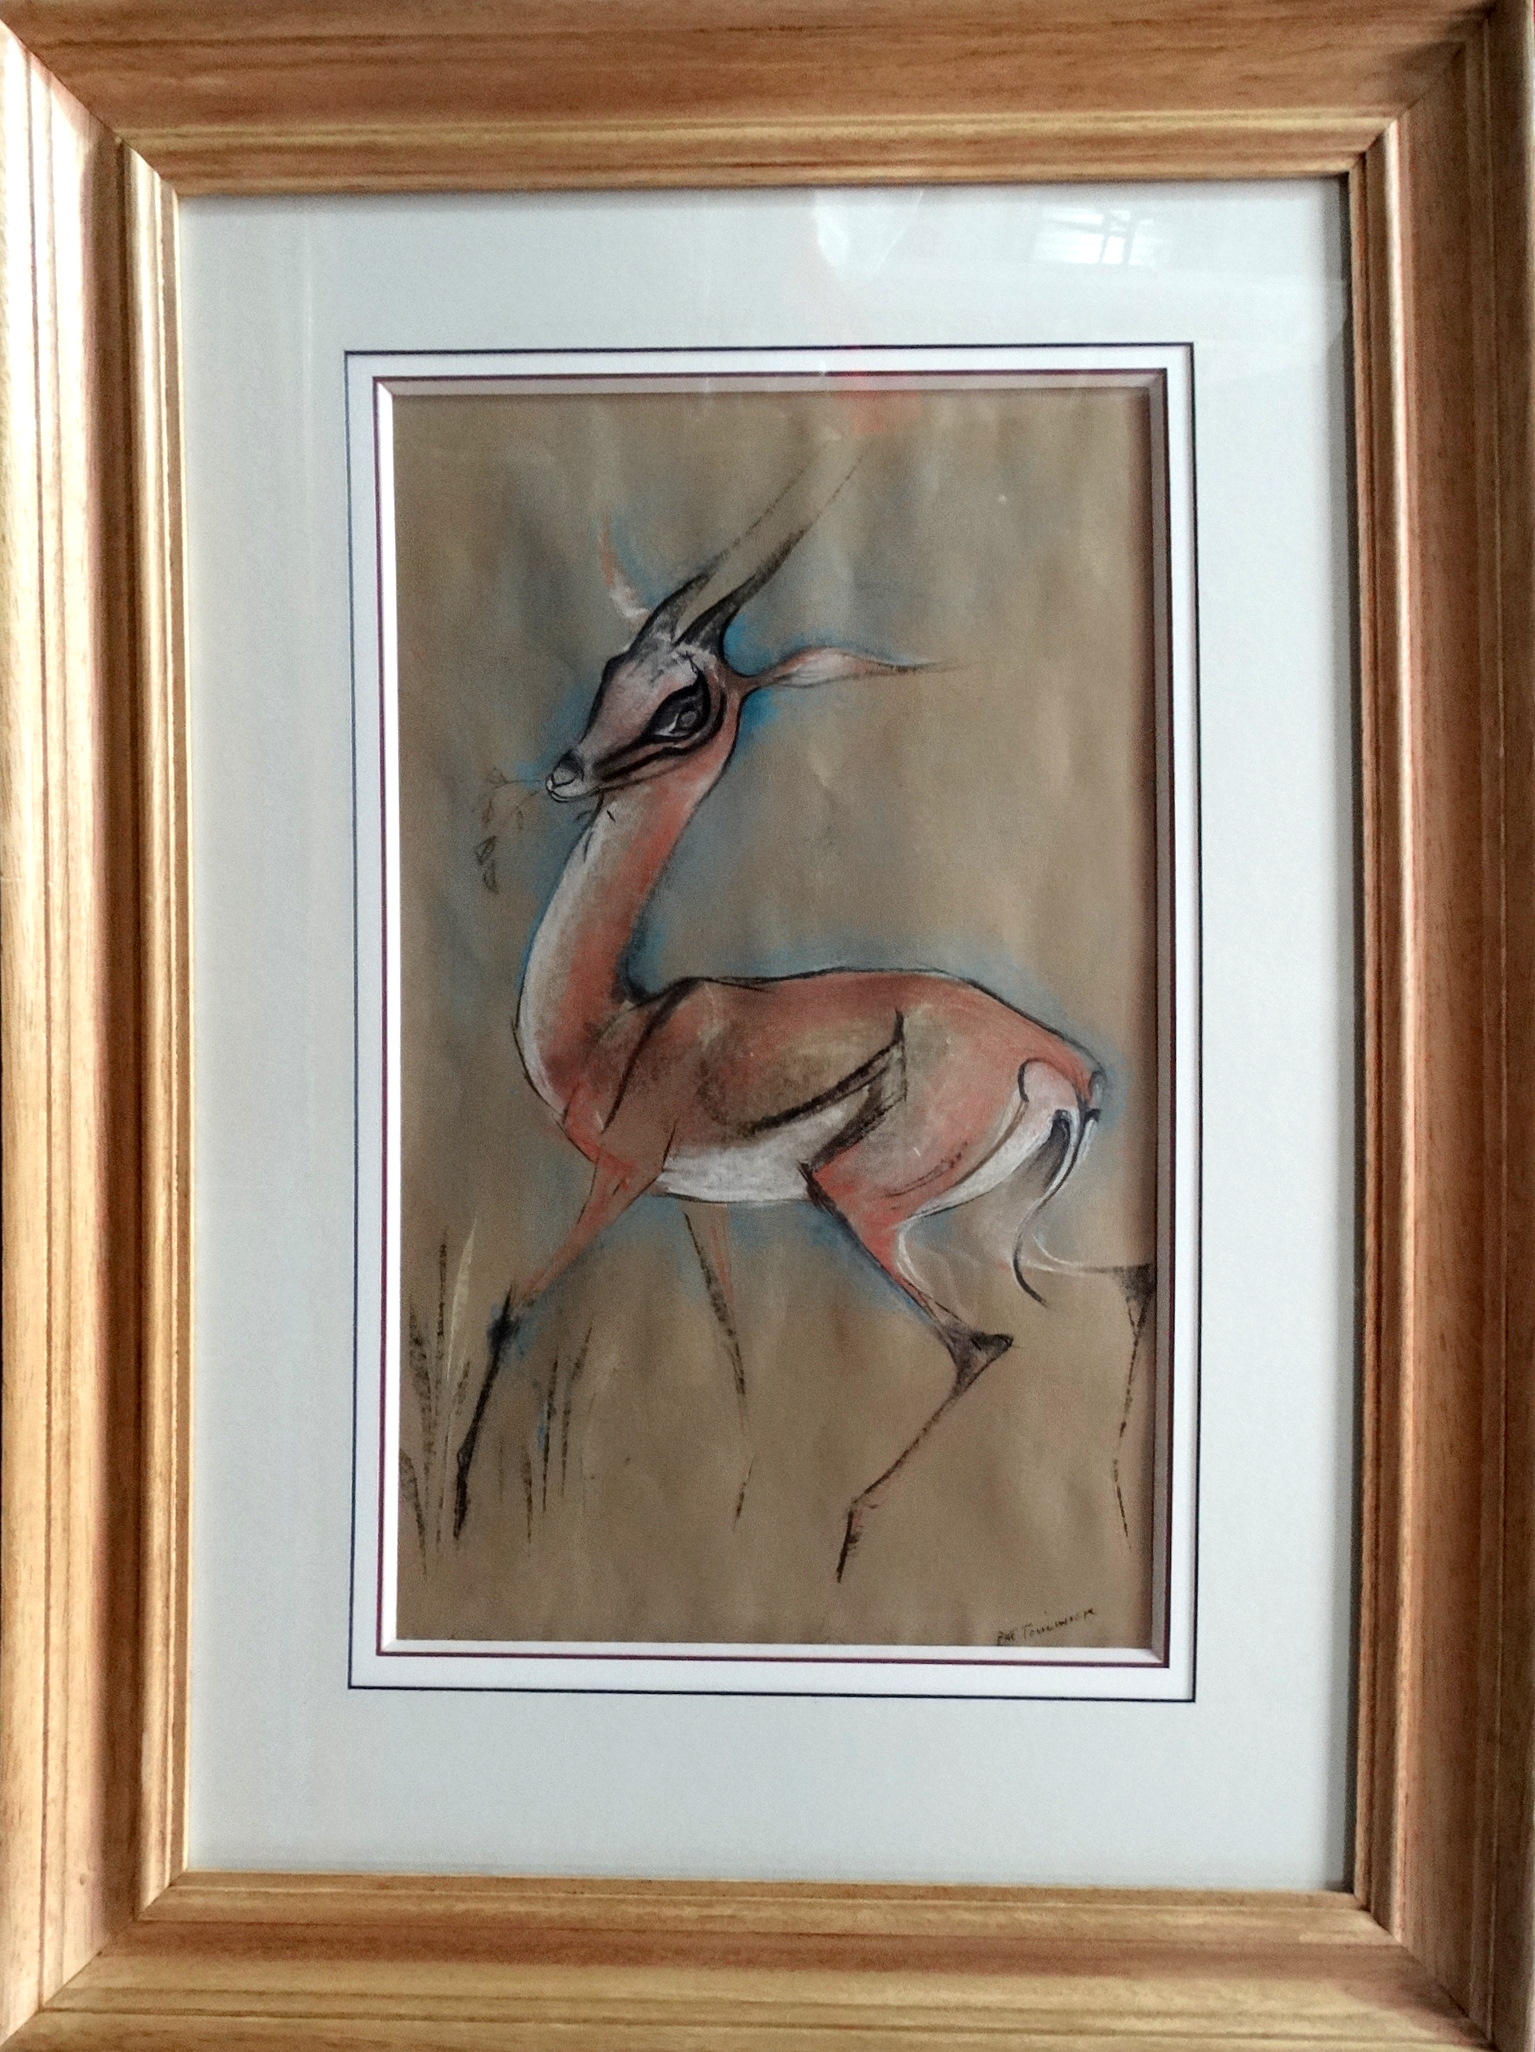 Pat TOMLINSON (British 20th/21st century) Impala Pastel on paper Signed lower right Framed and - Image 2 of 4